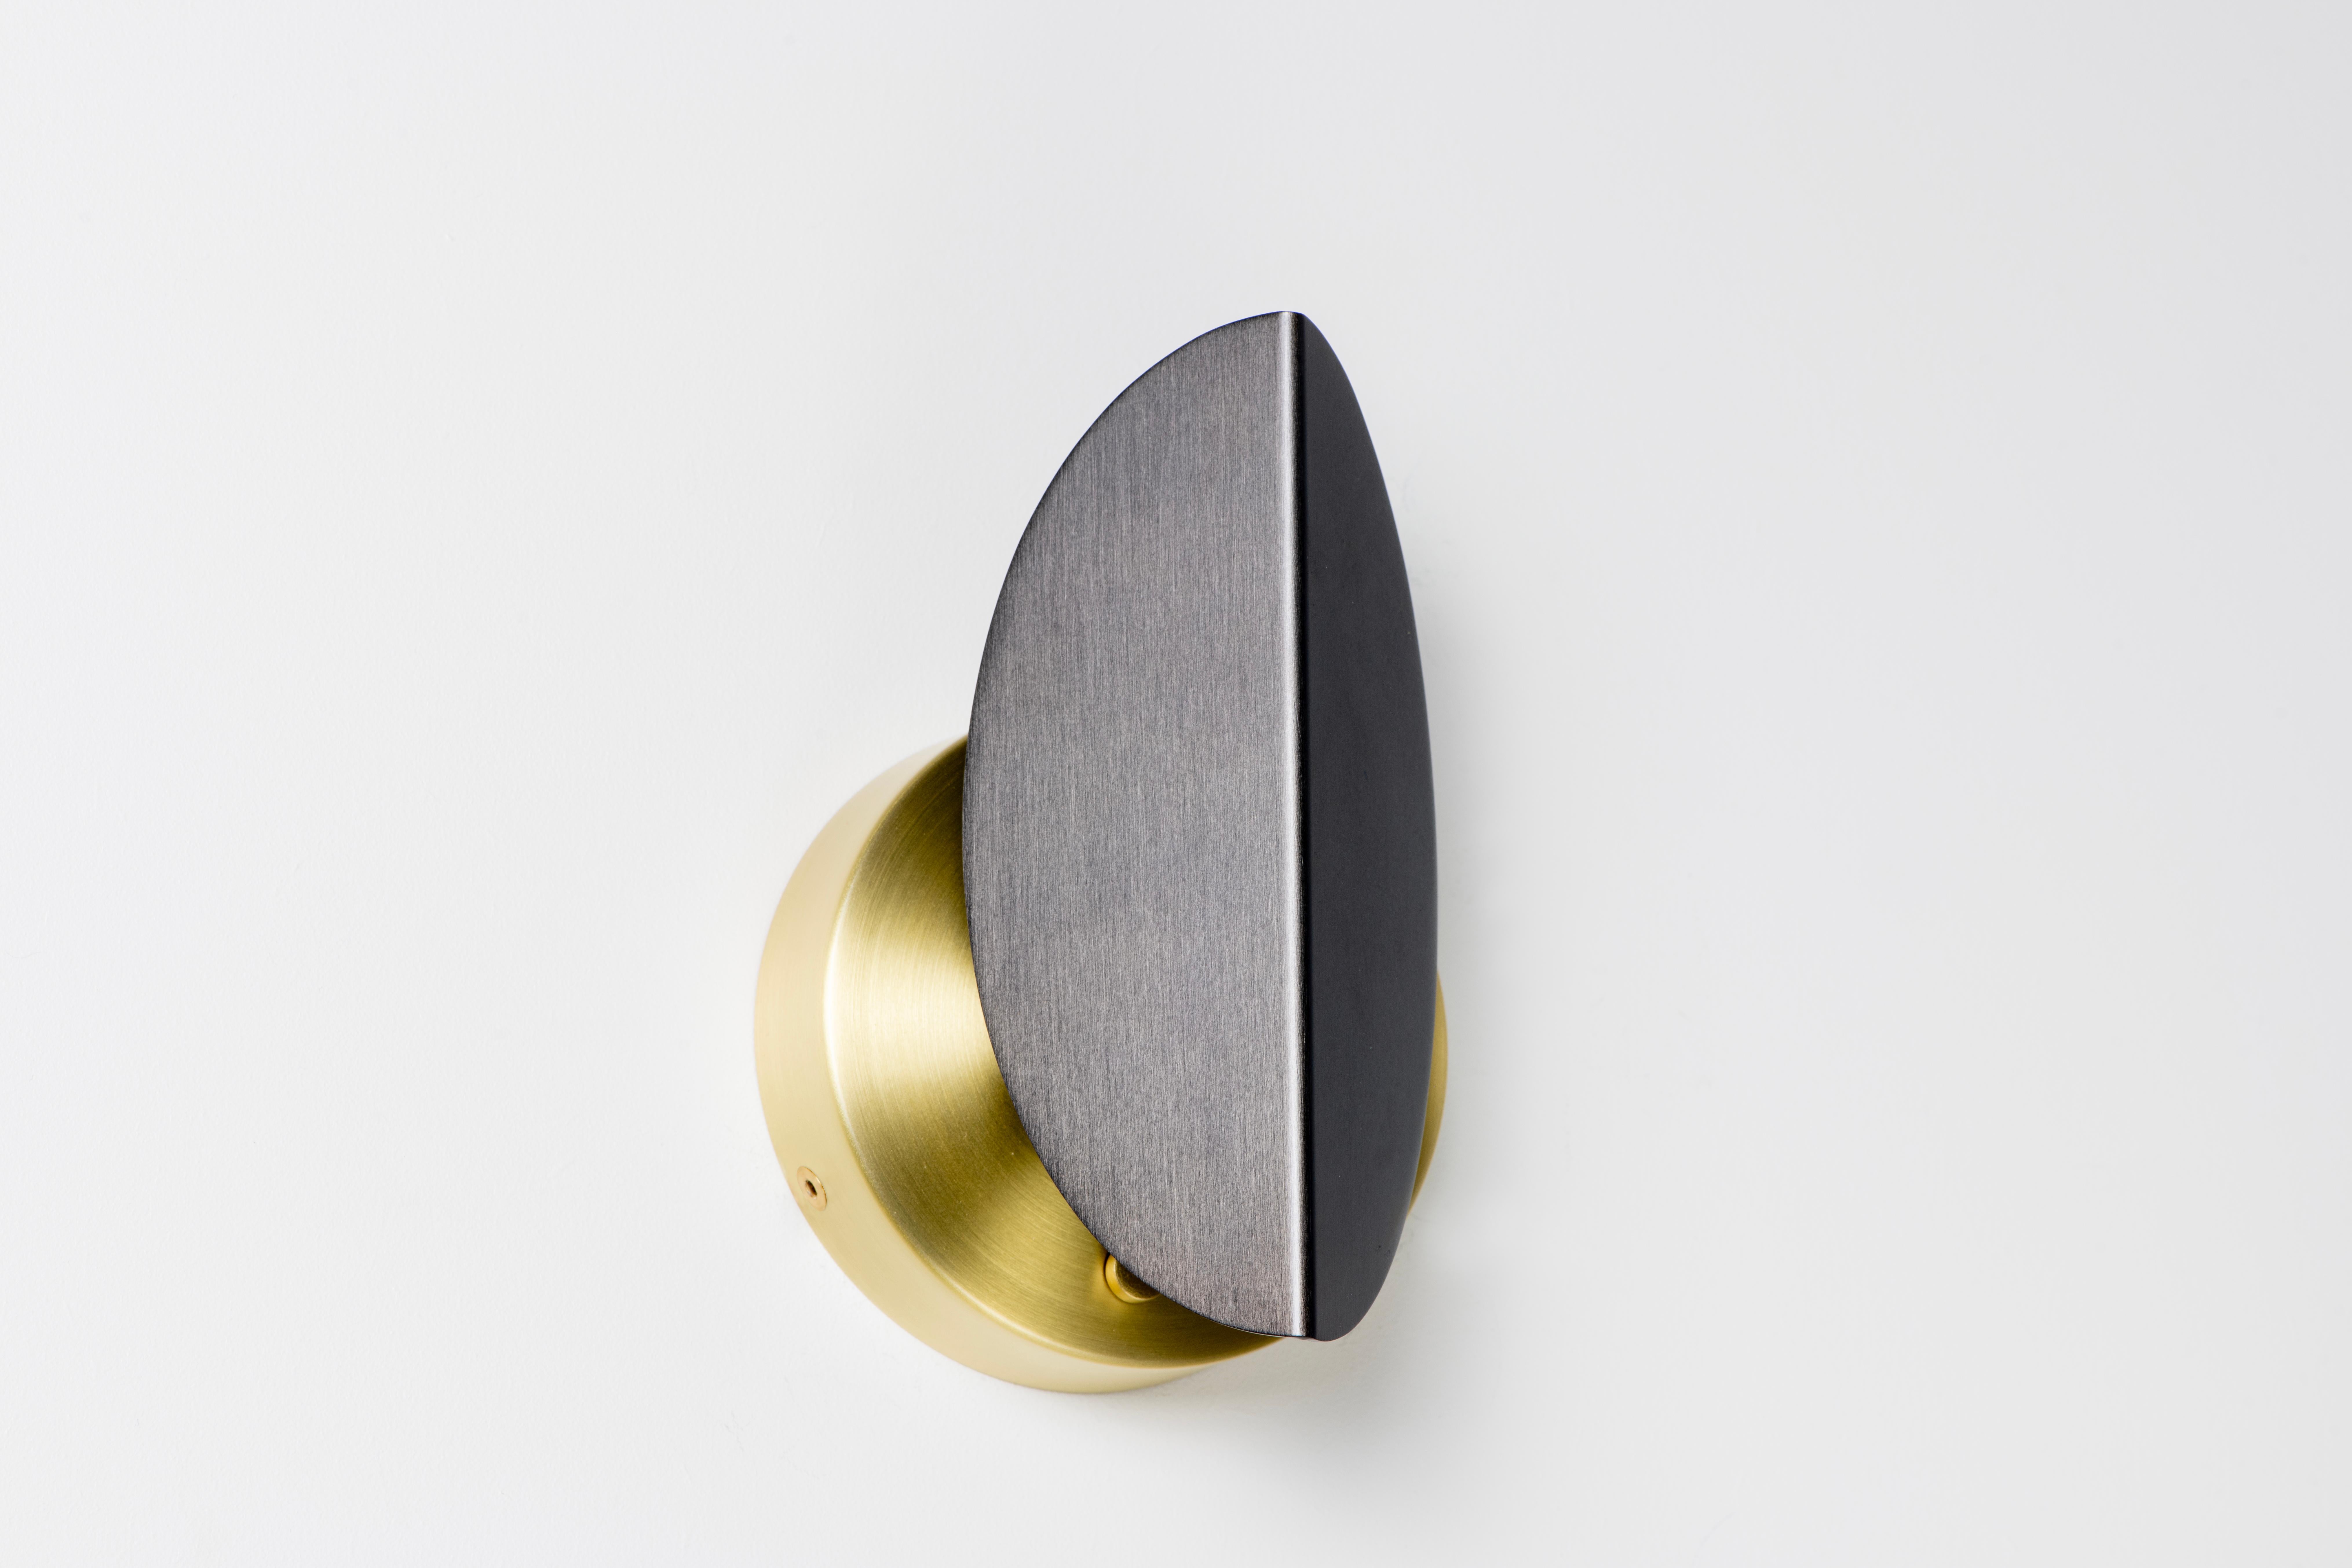 Graphite Pirouette V2 Wall Light by Emilie Cathelineau
Dimensions: D 9 x W 11 X H 16.2 cm
Materials: Solid brass, Finishes: Satin graphite.


Pirouette is a unique little wall lamp, both decorative and functional. The 360° rotation of its light beam